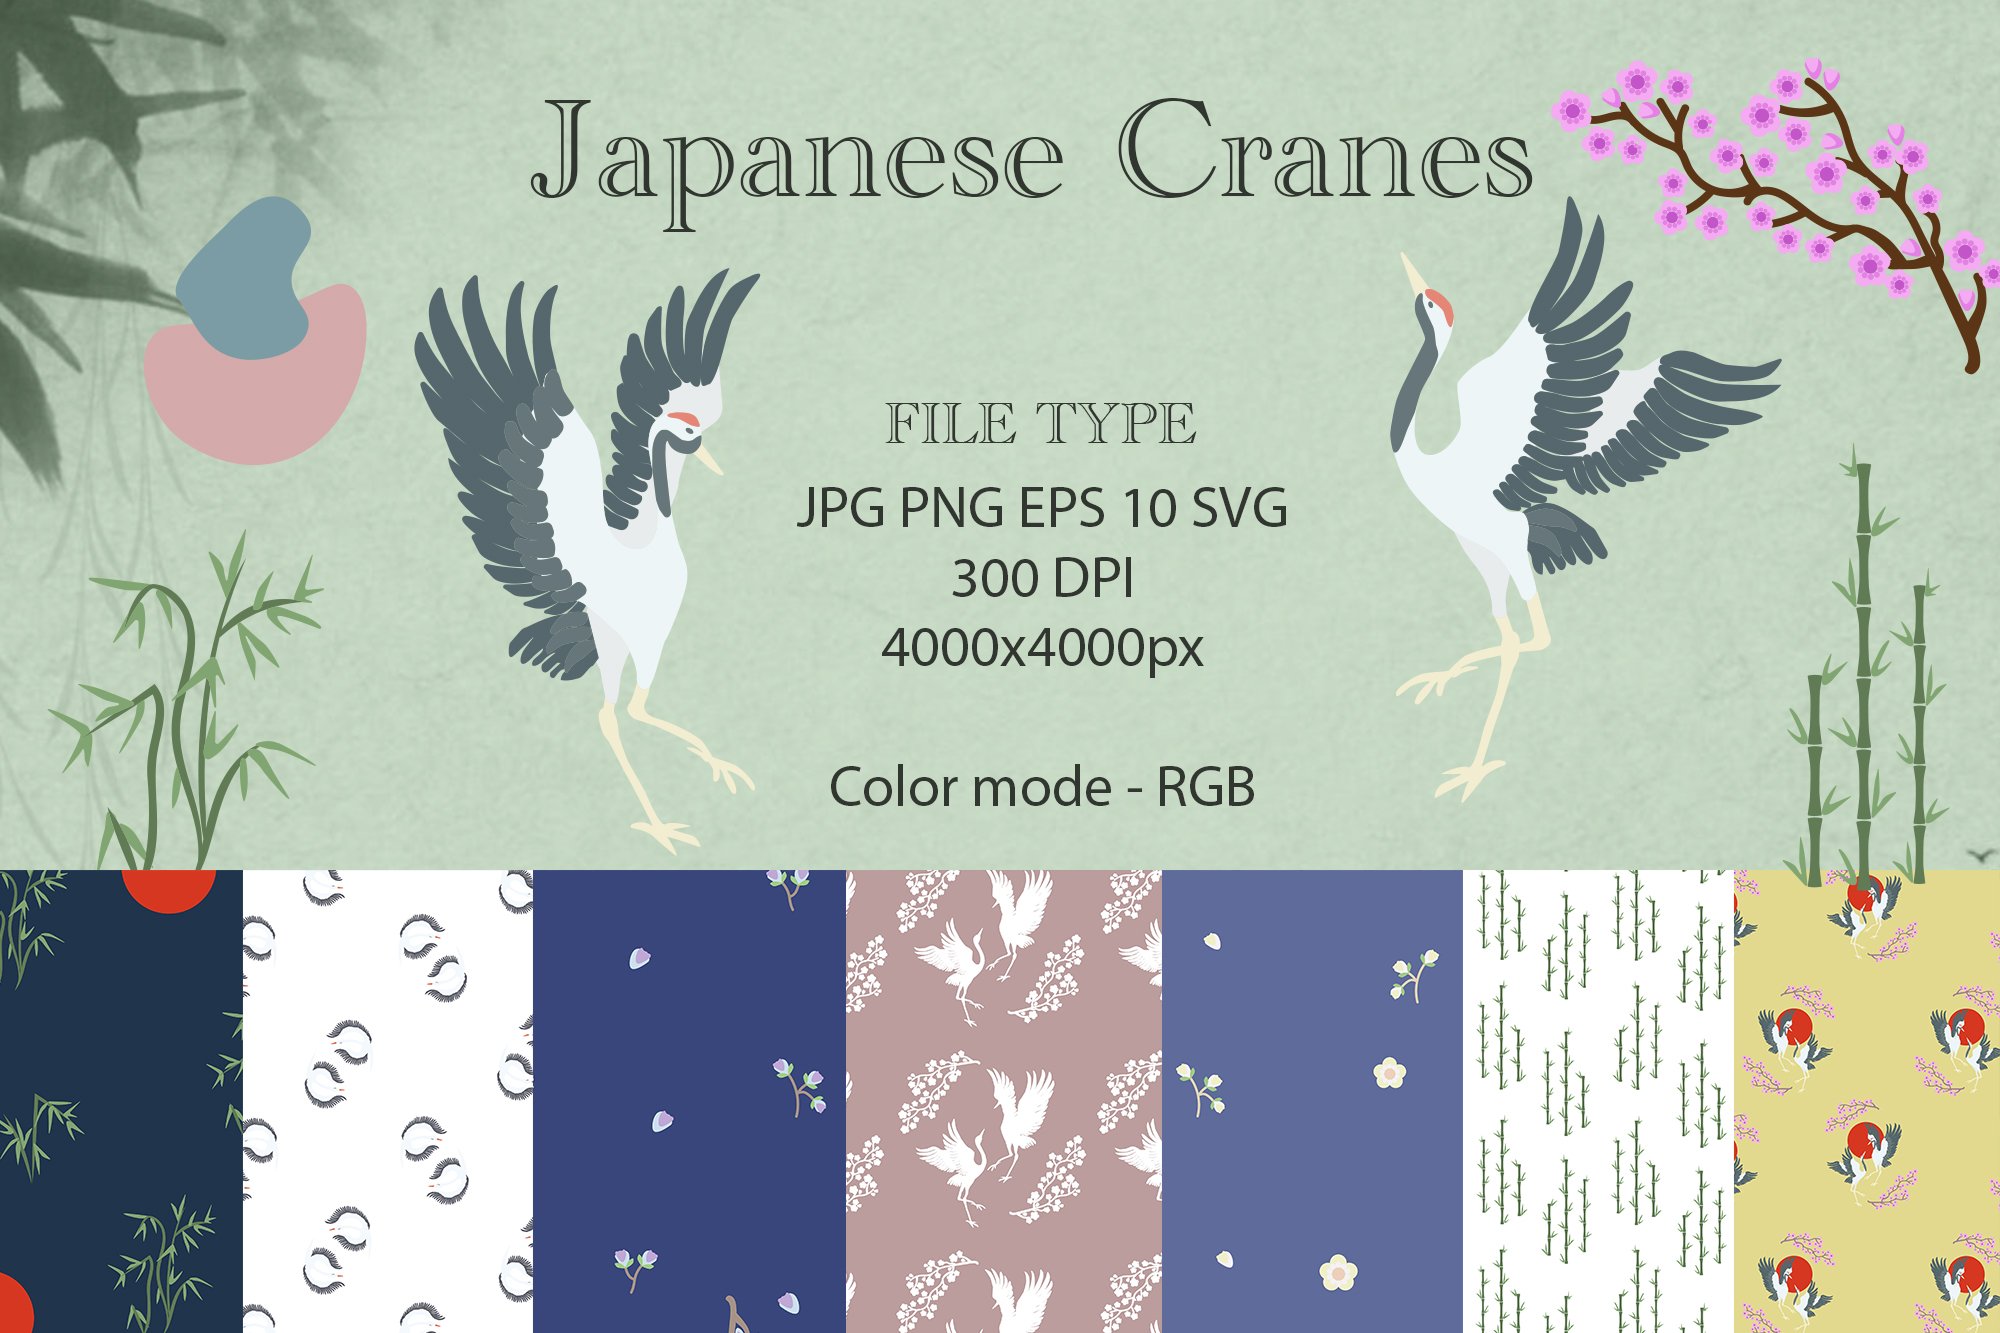 Japanese Cranes - Shadoof cover image.